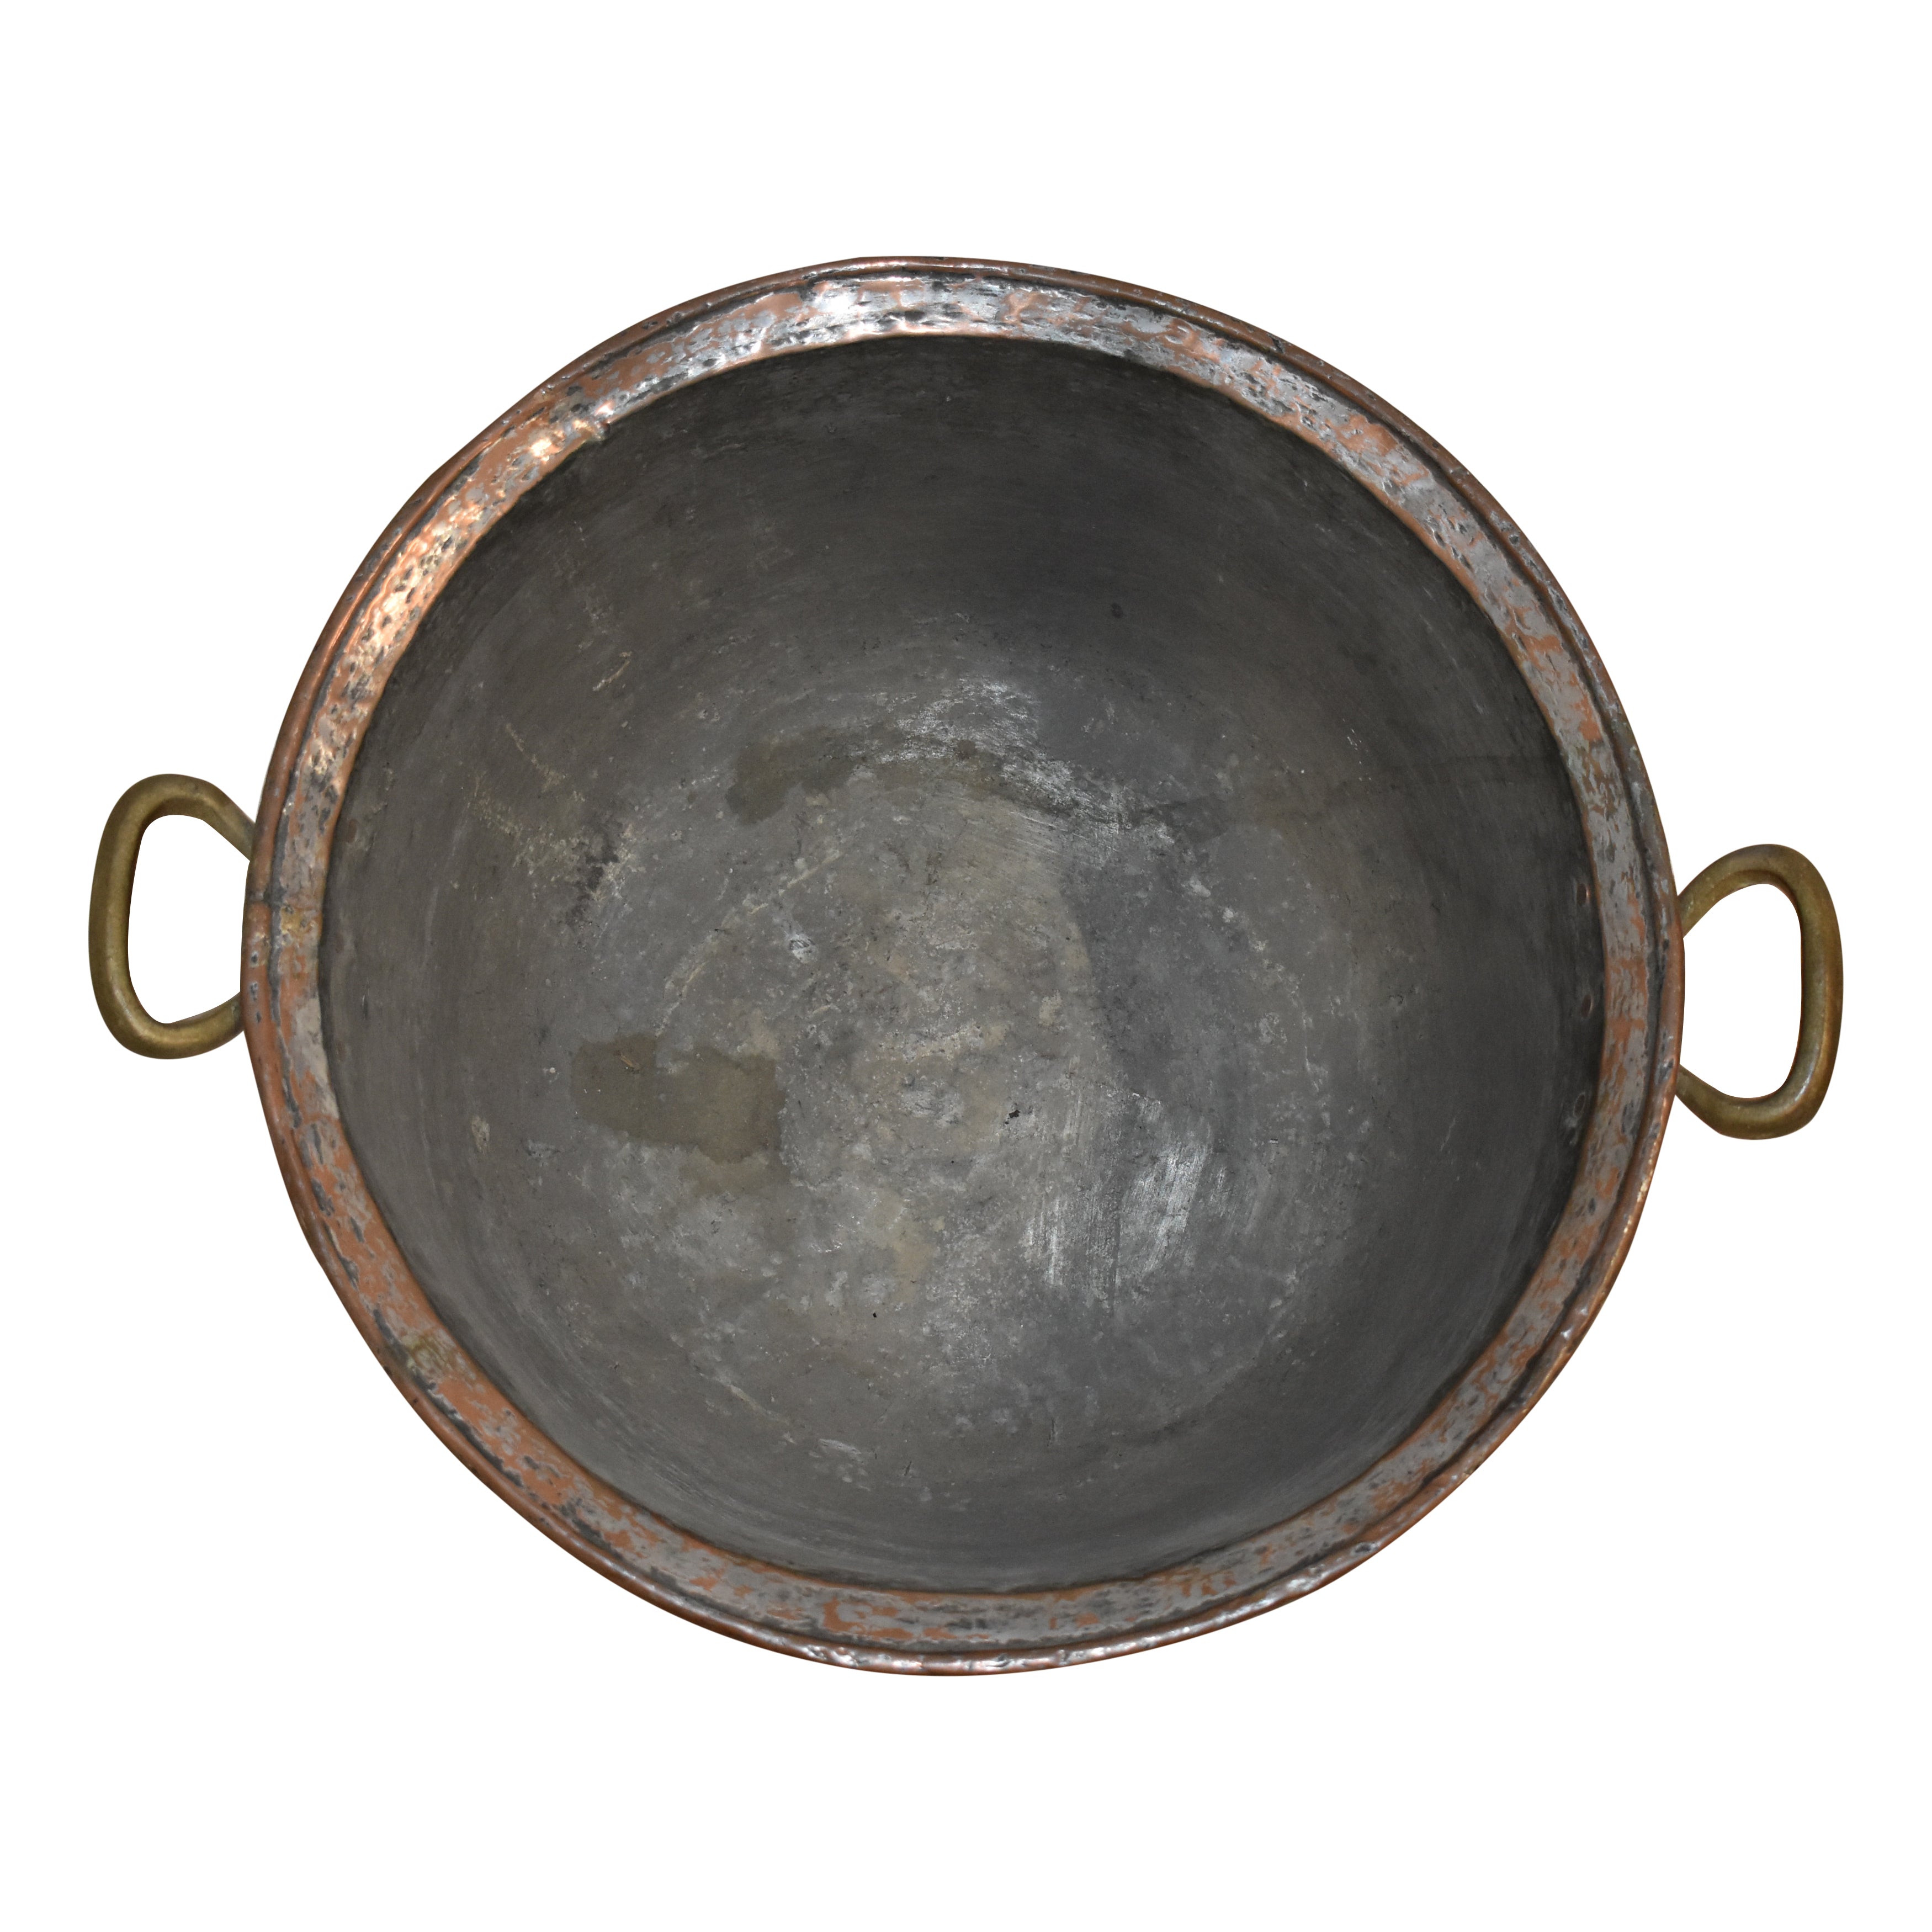 Copper Pot with Brass Handles